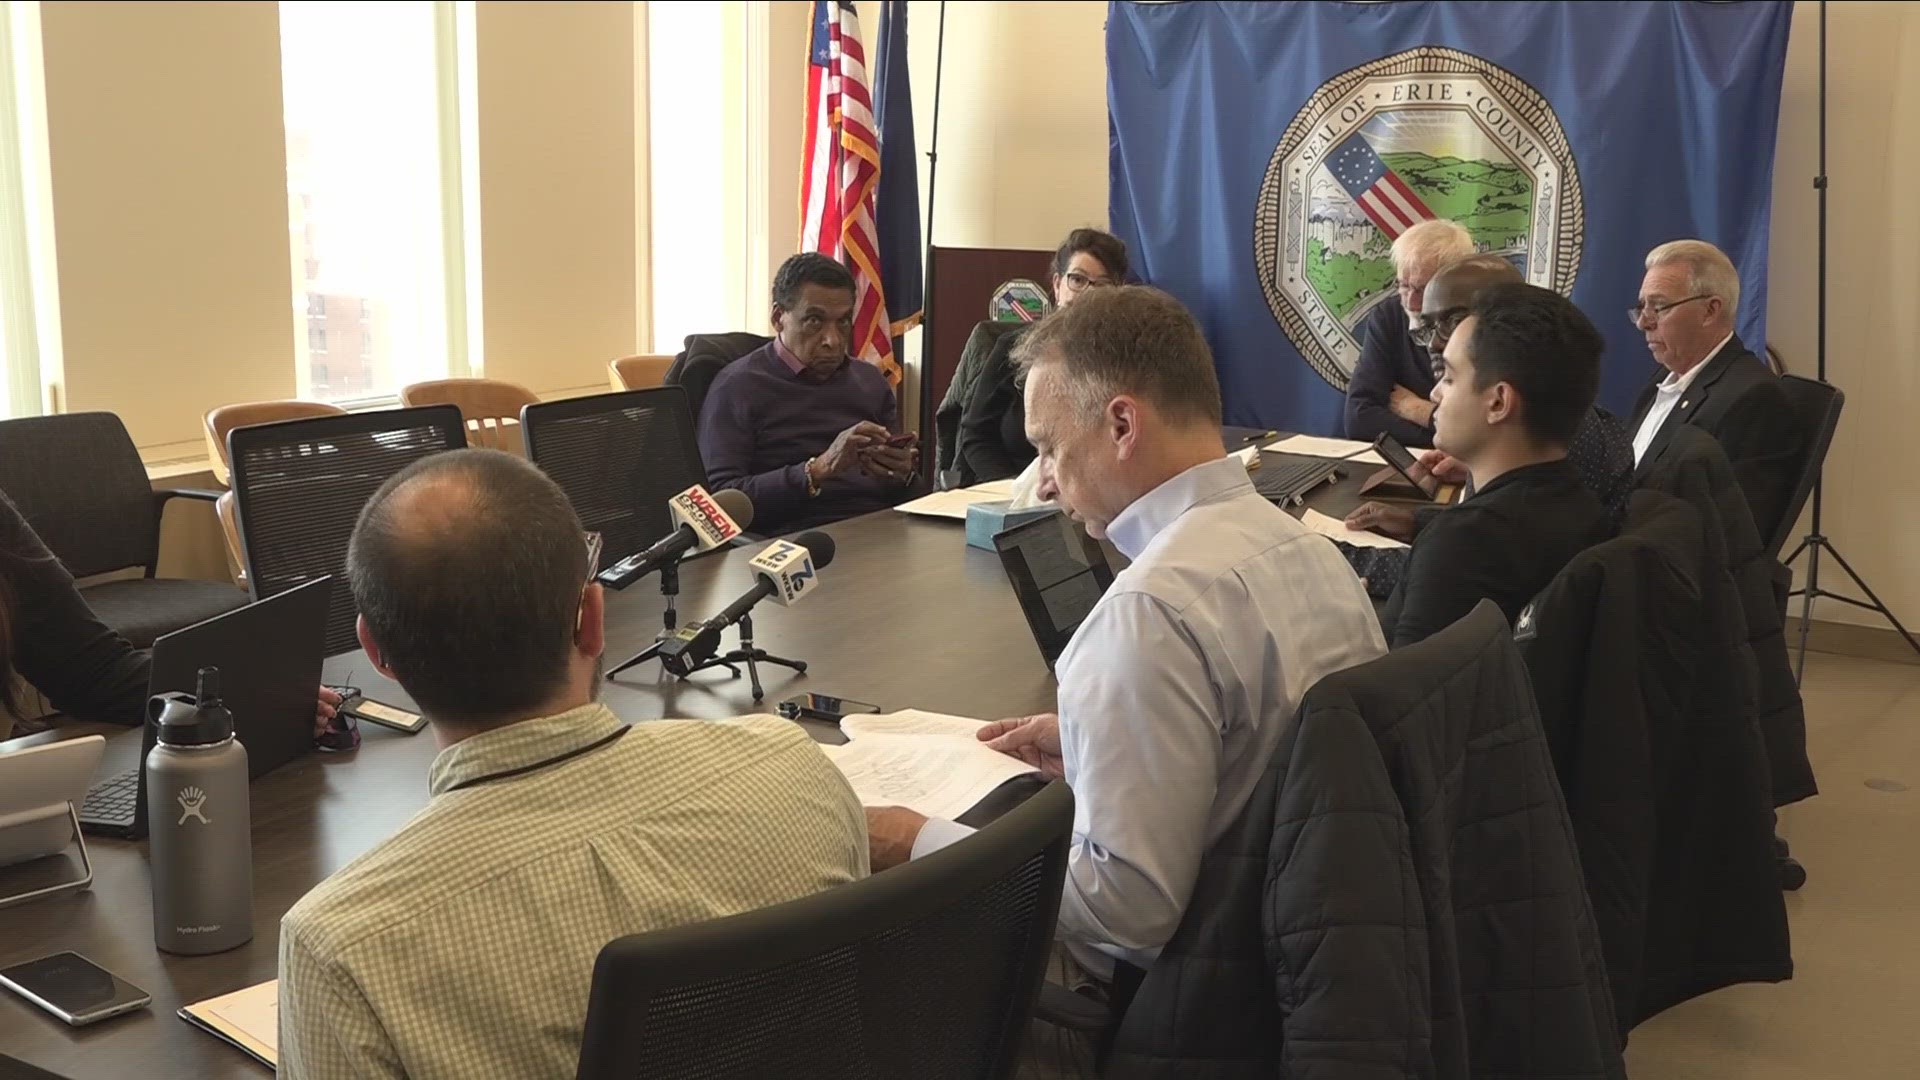 The Erie County 'Citizens Salary Review Commission' has finalized recommended  pay raises for the county's elected officials